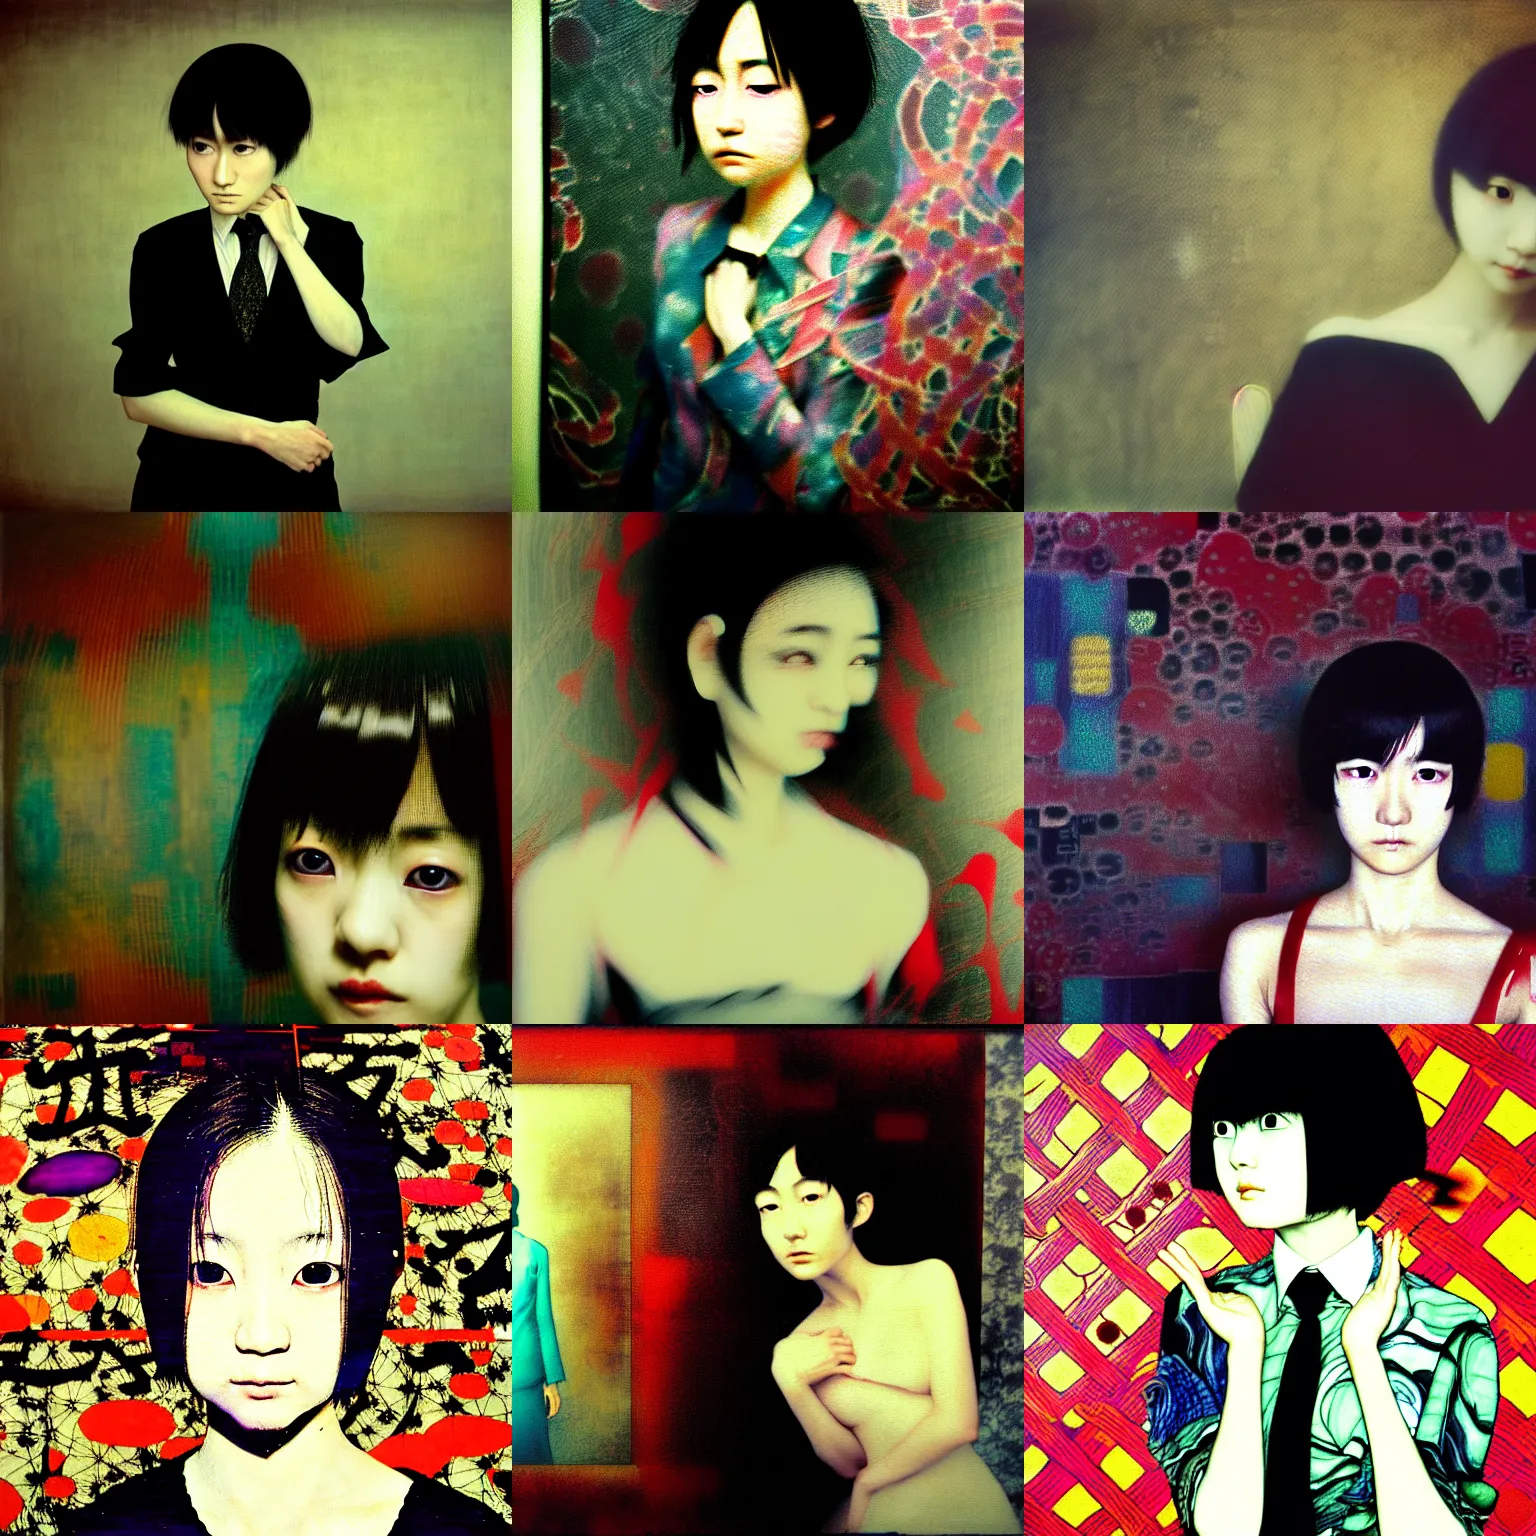 Prompt: yoshitaka amano blurred and dreamy realistic portrait of a young woman with short hair and black eyes wearing dress suit with tie, junji ito abstract patterns in the background, satoshi kon anime, noisy film grain effect, highly detailed, renaissance oil painting, weird camera angle, blurred lost edges, photo by nan goldin